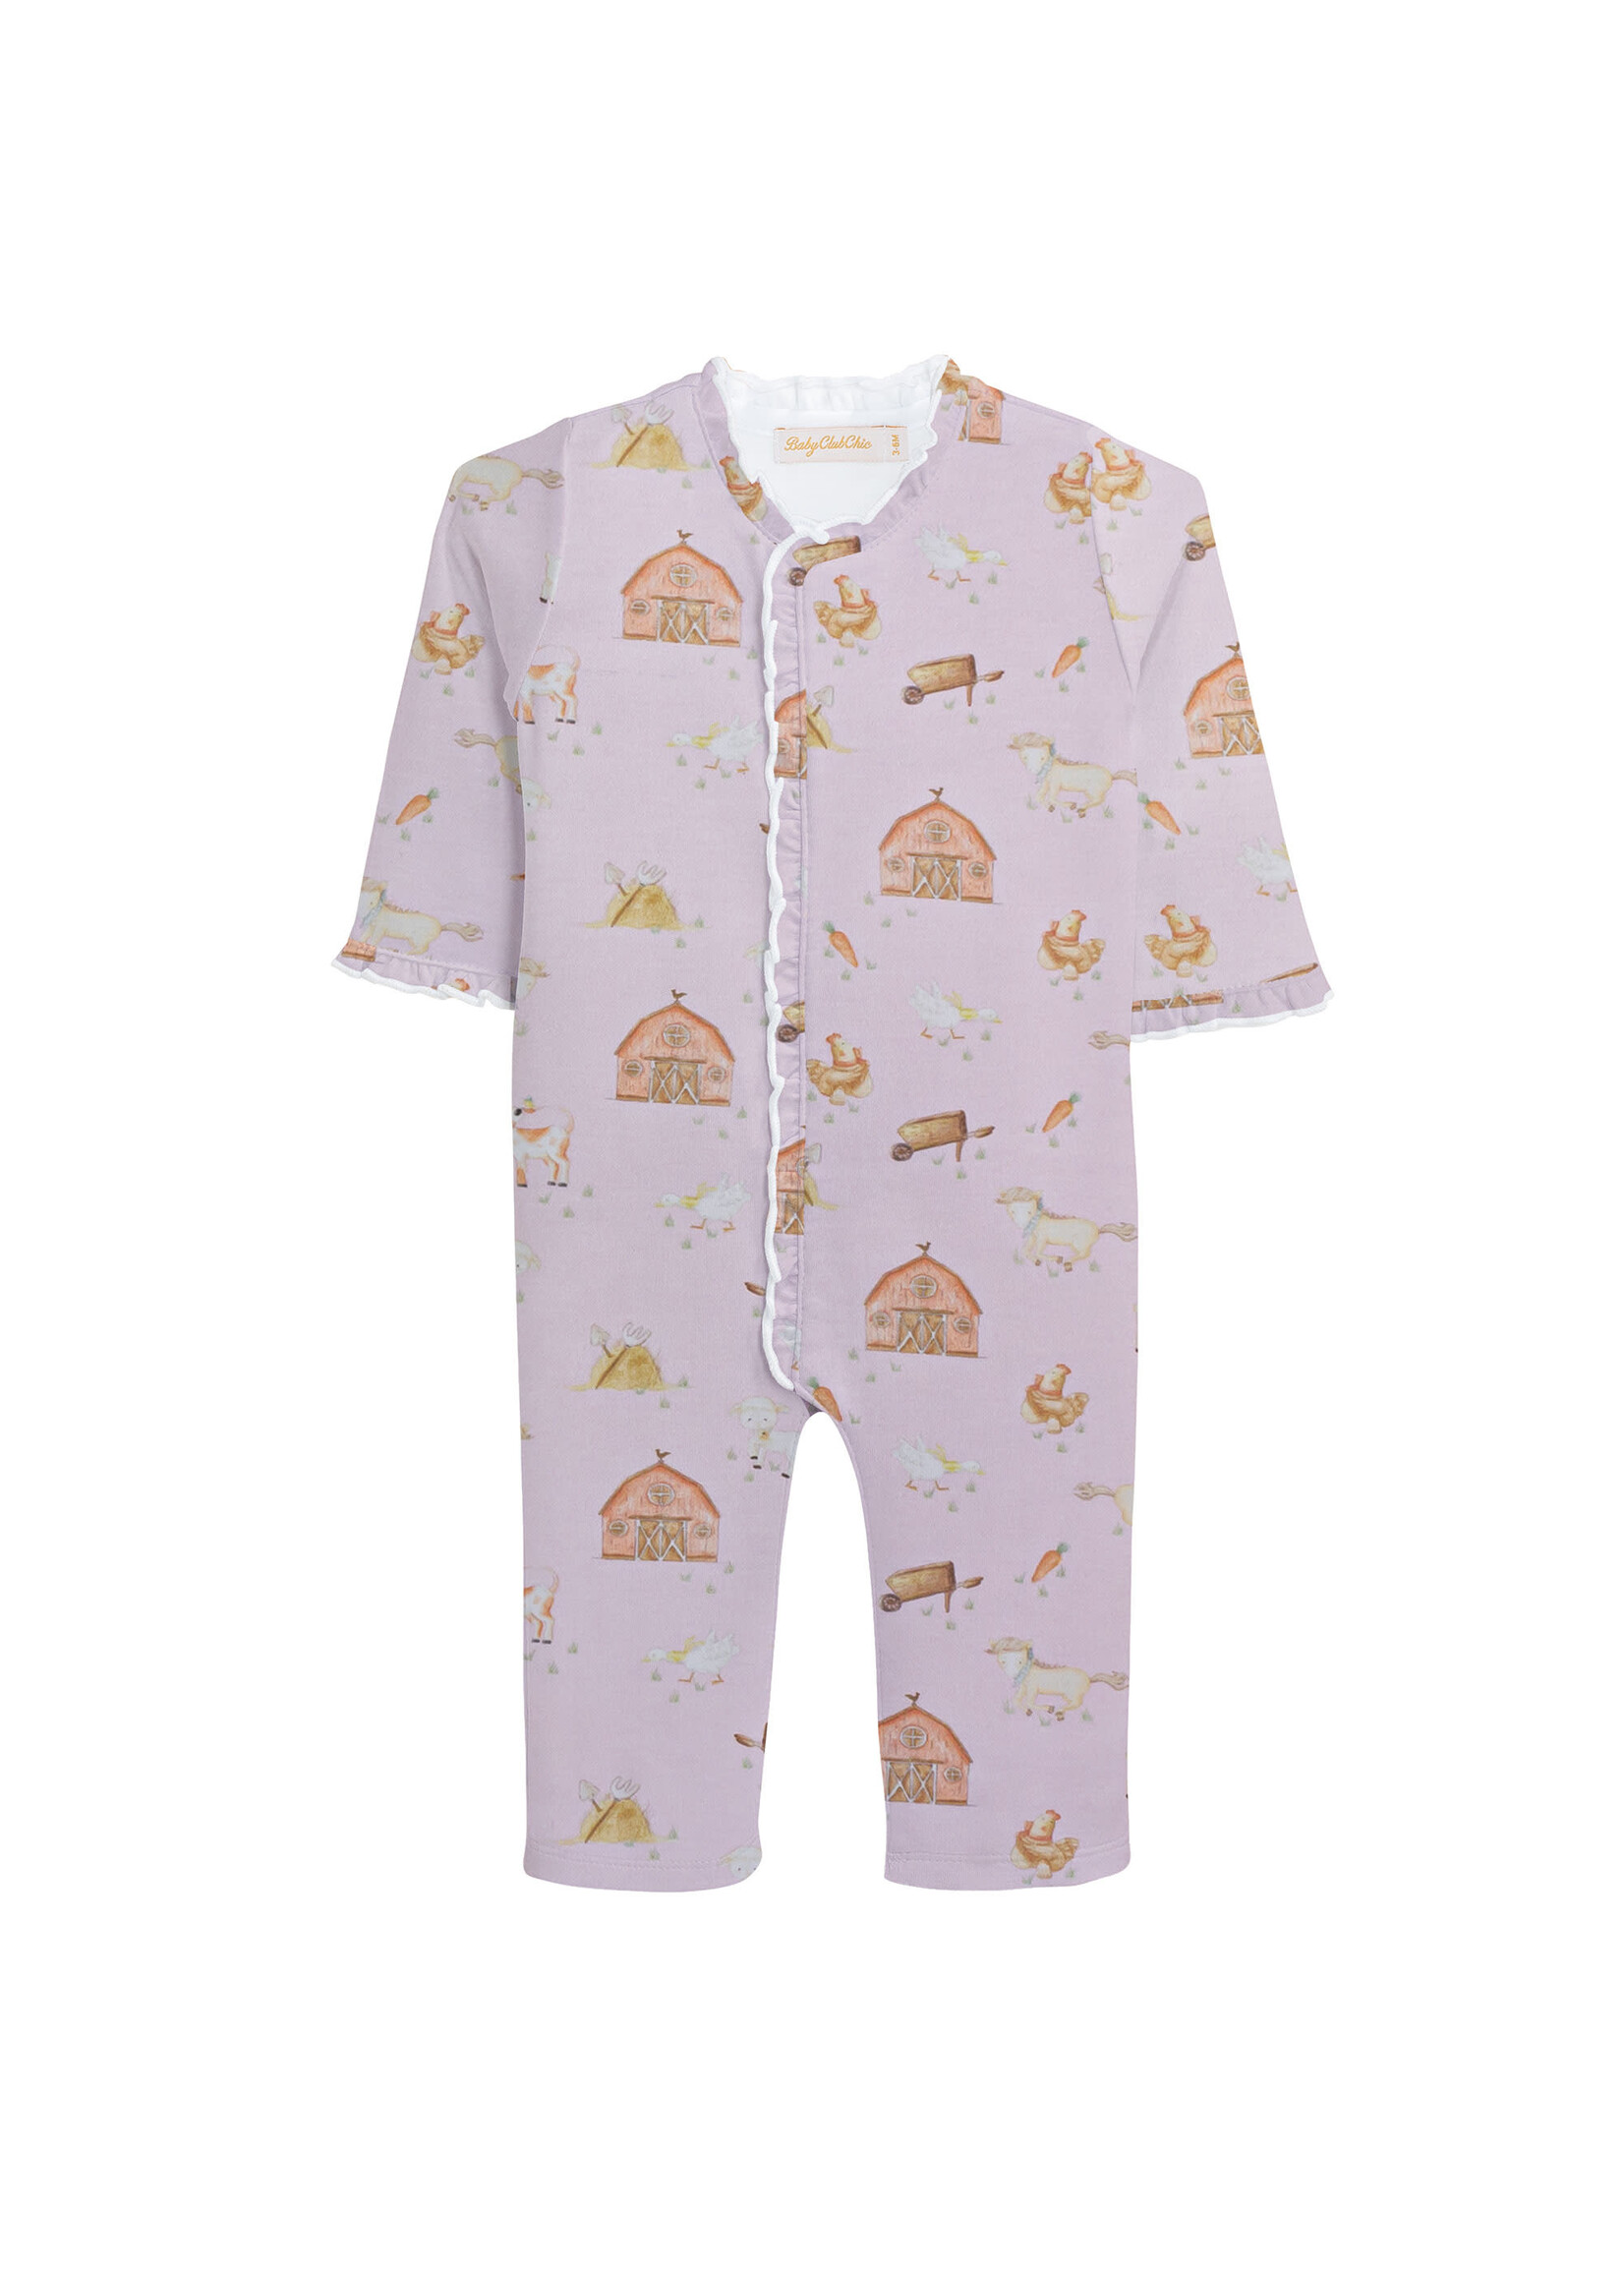 Baby Club Chic Little Farm Pink Coverall